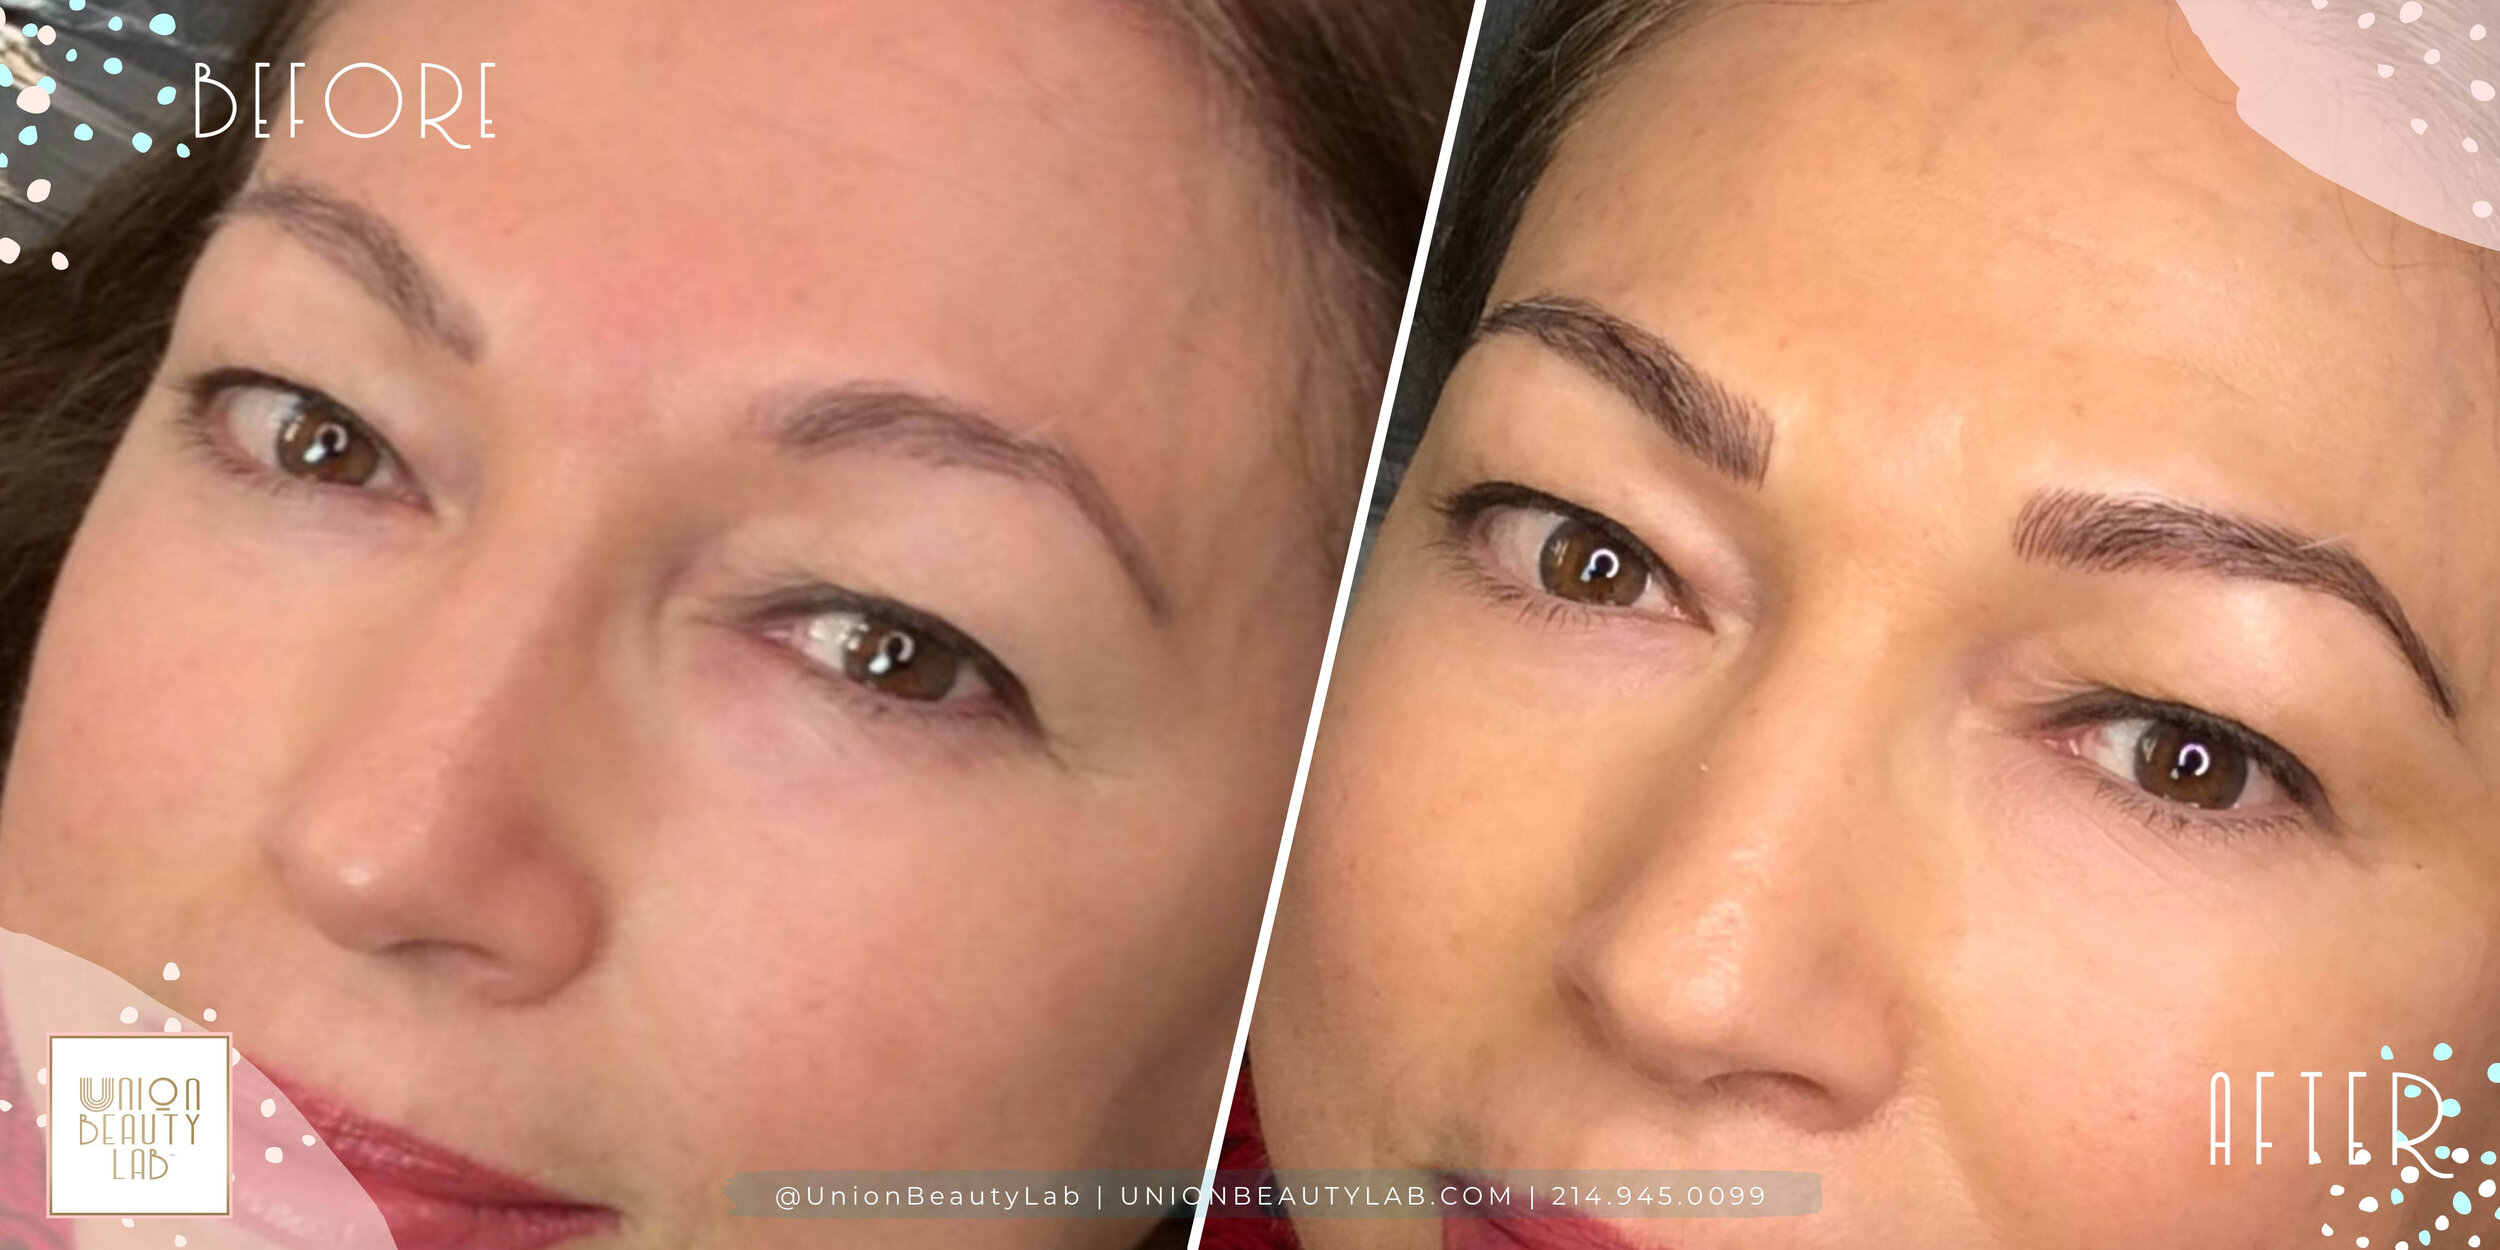 2149450099 Union Beauty Lab Microblading Artists Dallas Mature Brows 46.jpg